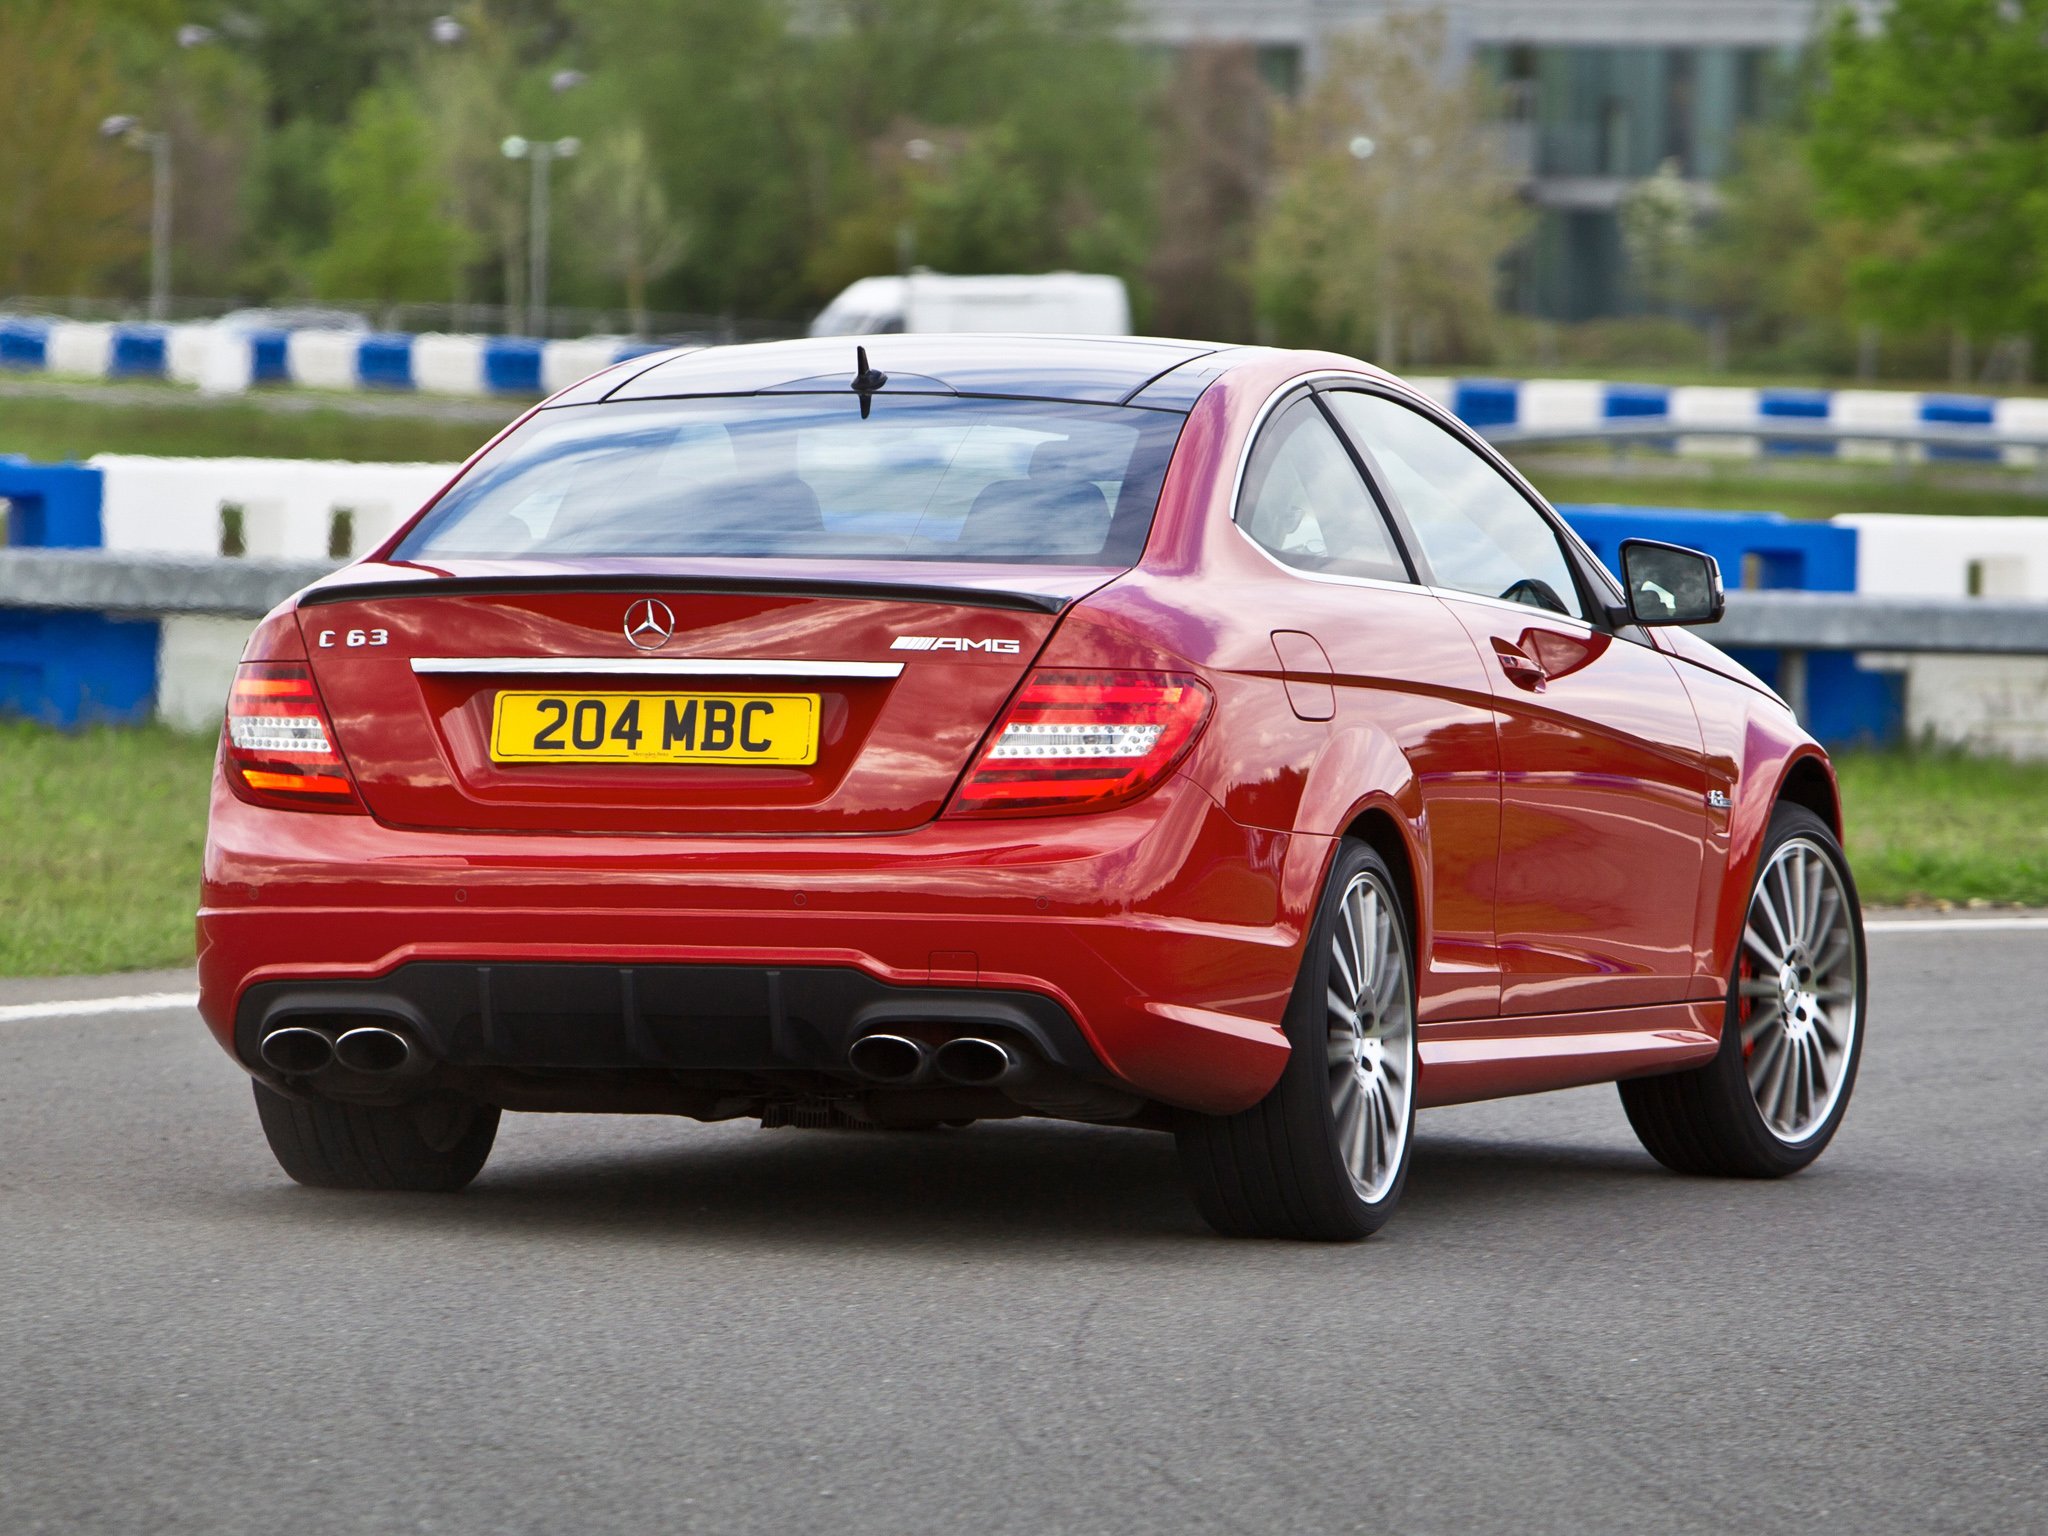 mercedes benz, C63, Amg, Coupe, Uk spec, C204, Cars, And0392011 Wallpaper